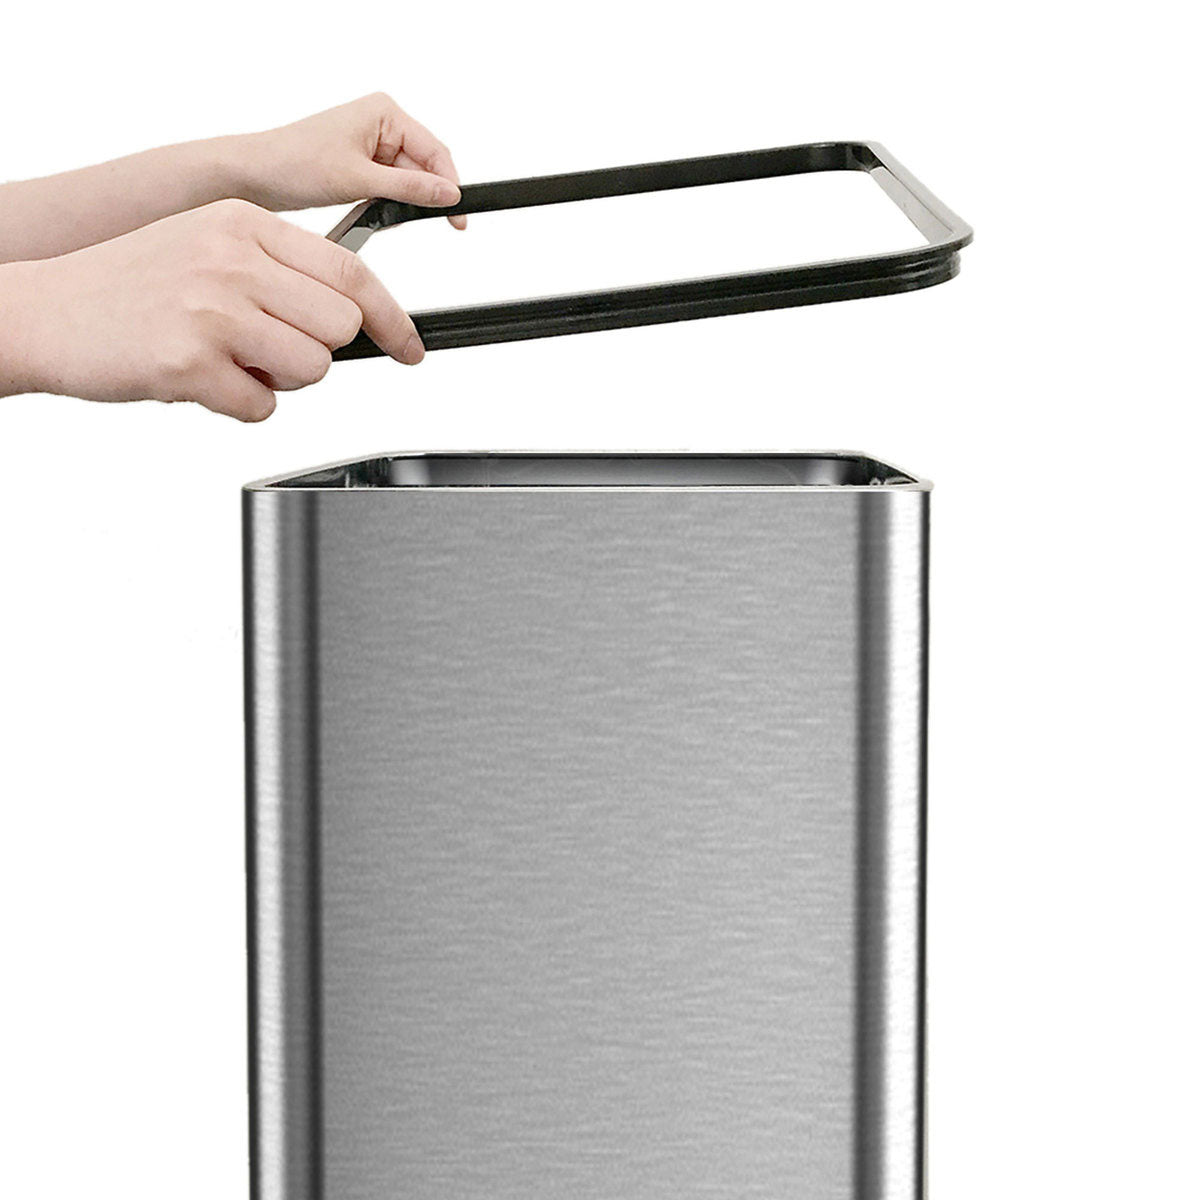 iTouchless IT13RX 13 Gallon Touchless Kitchen Garbage Trash Can